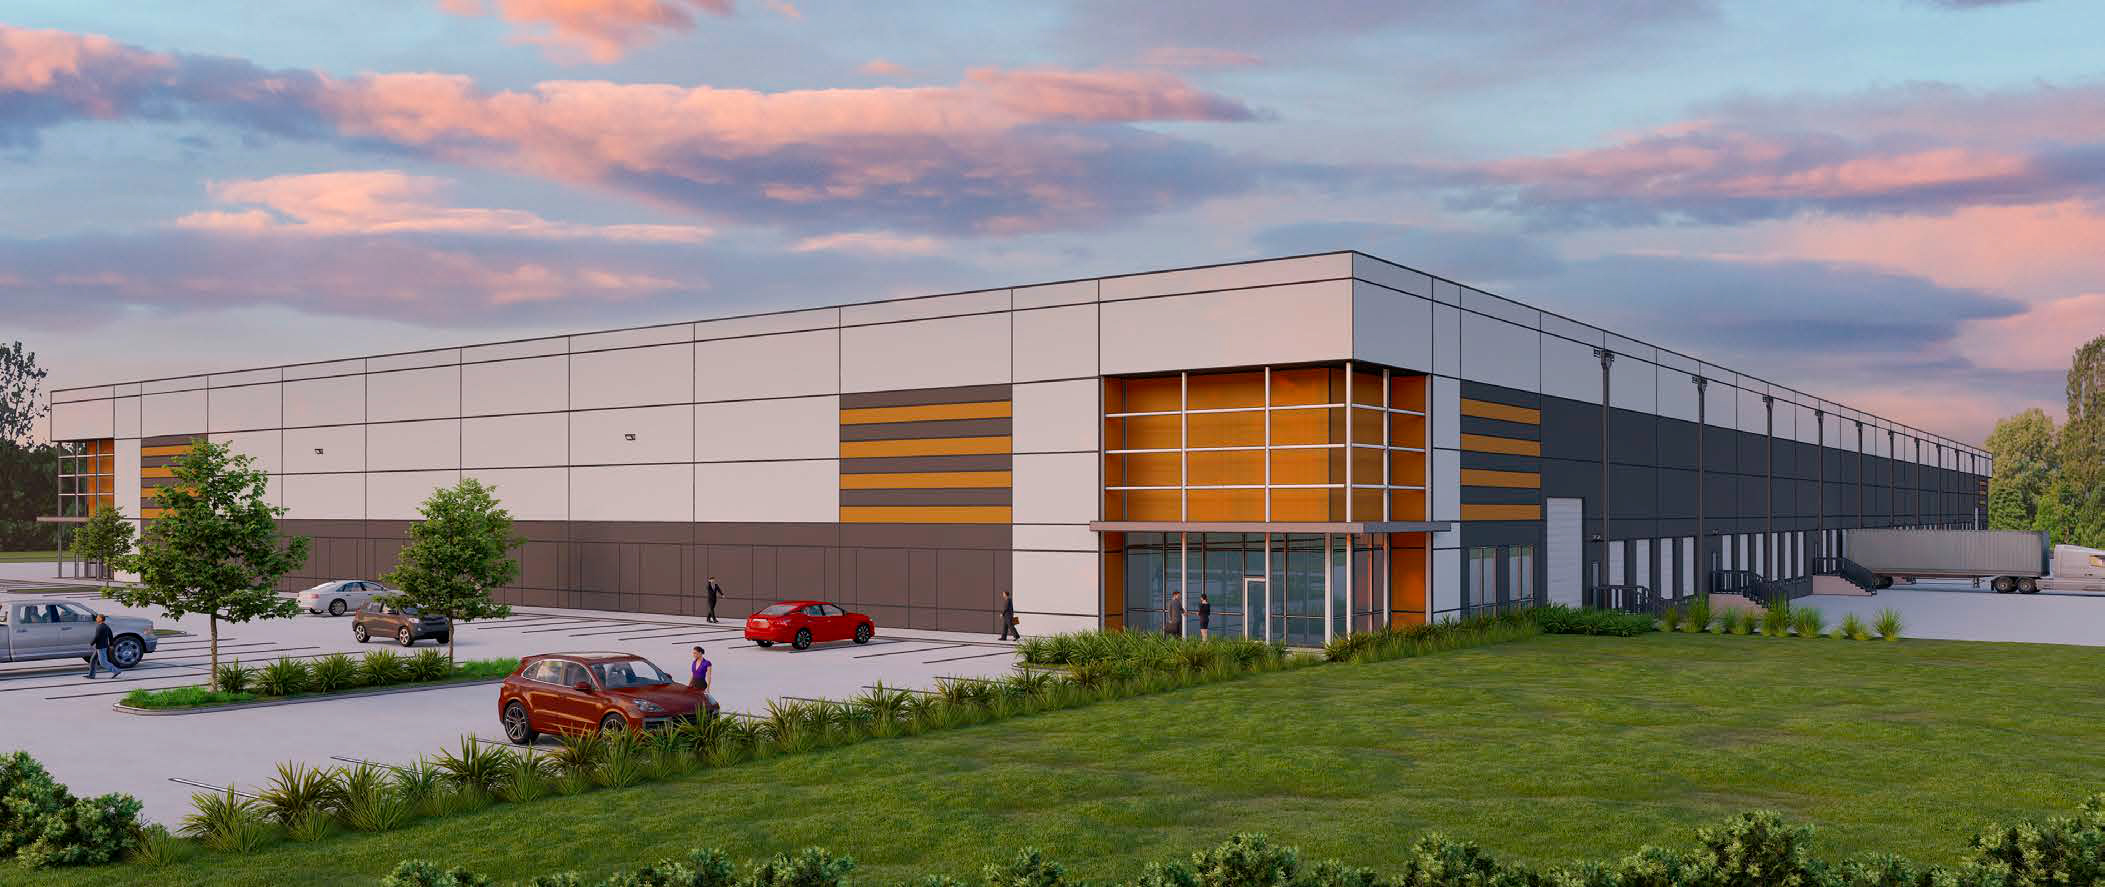 Austin Fulfillment Center by Keating Resources.